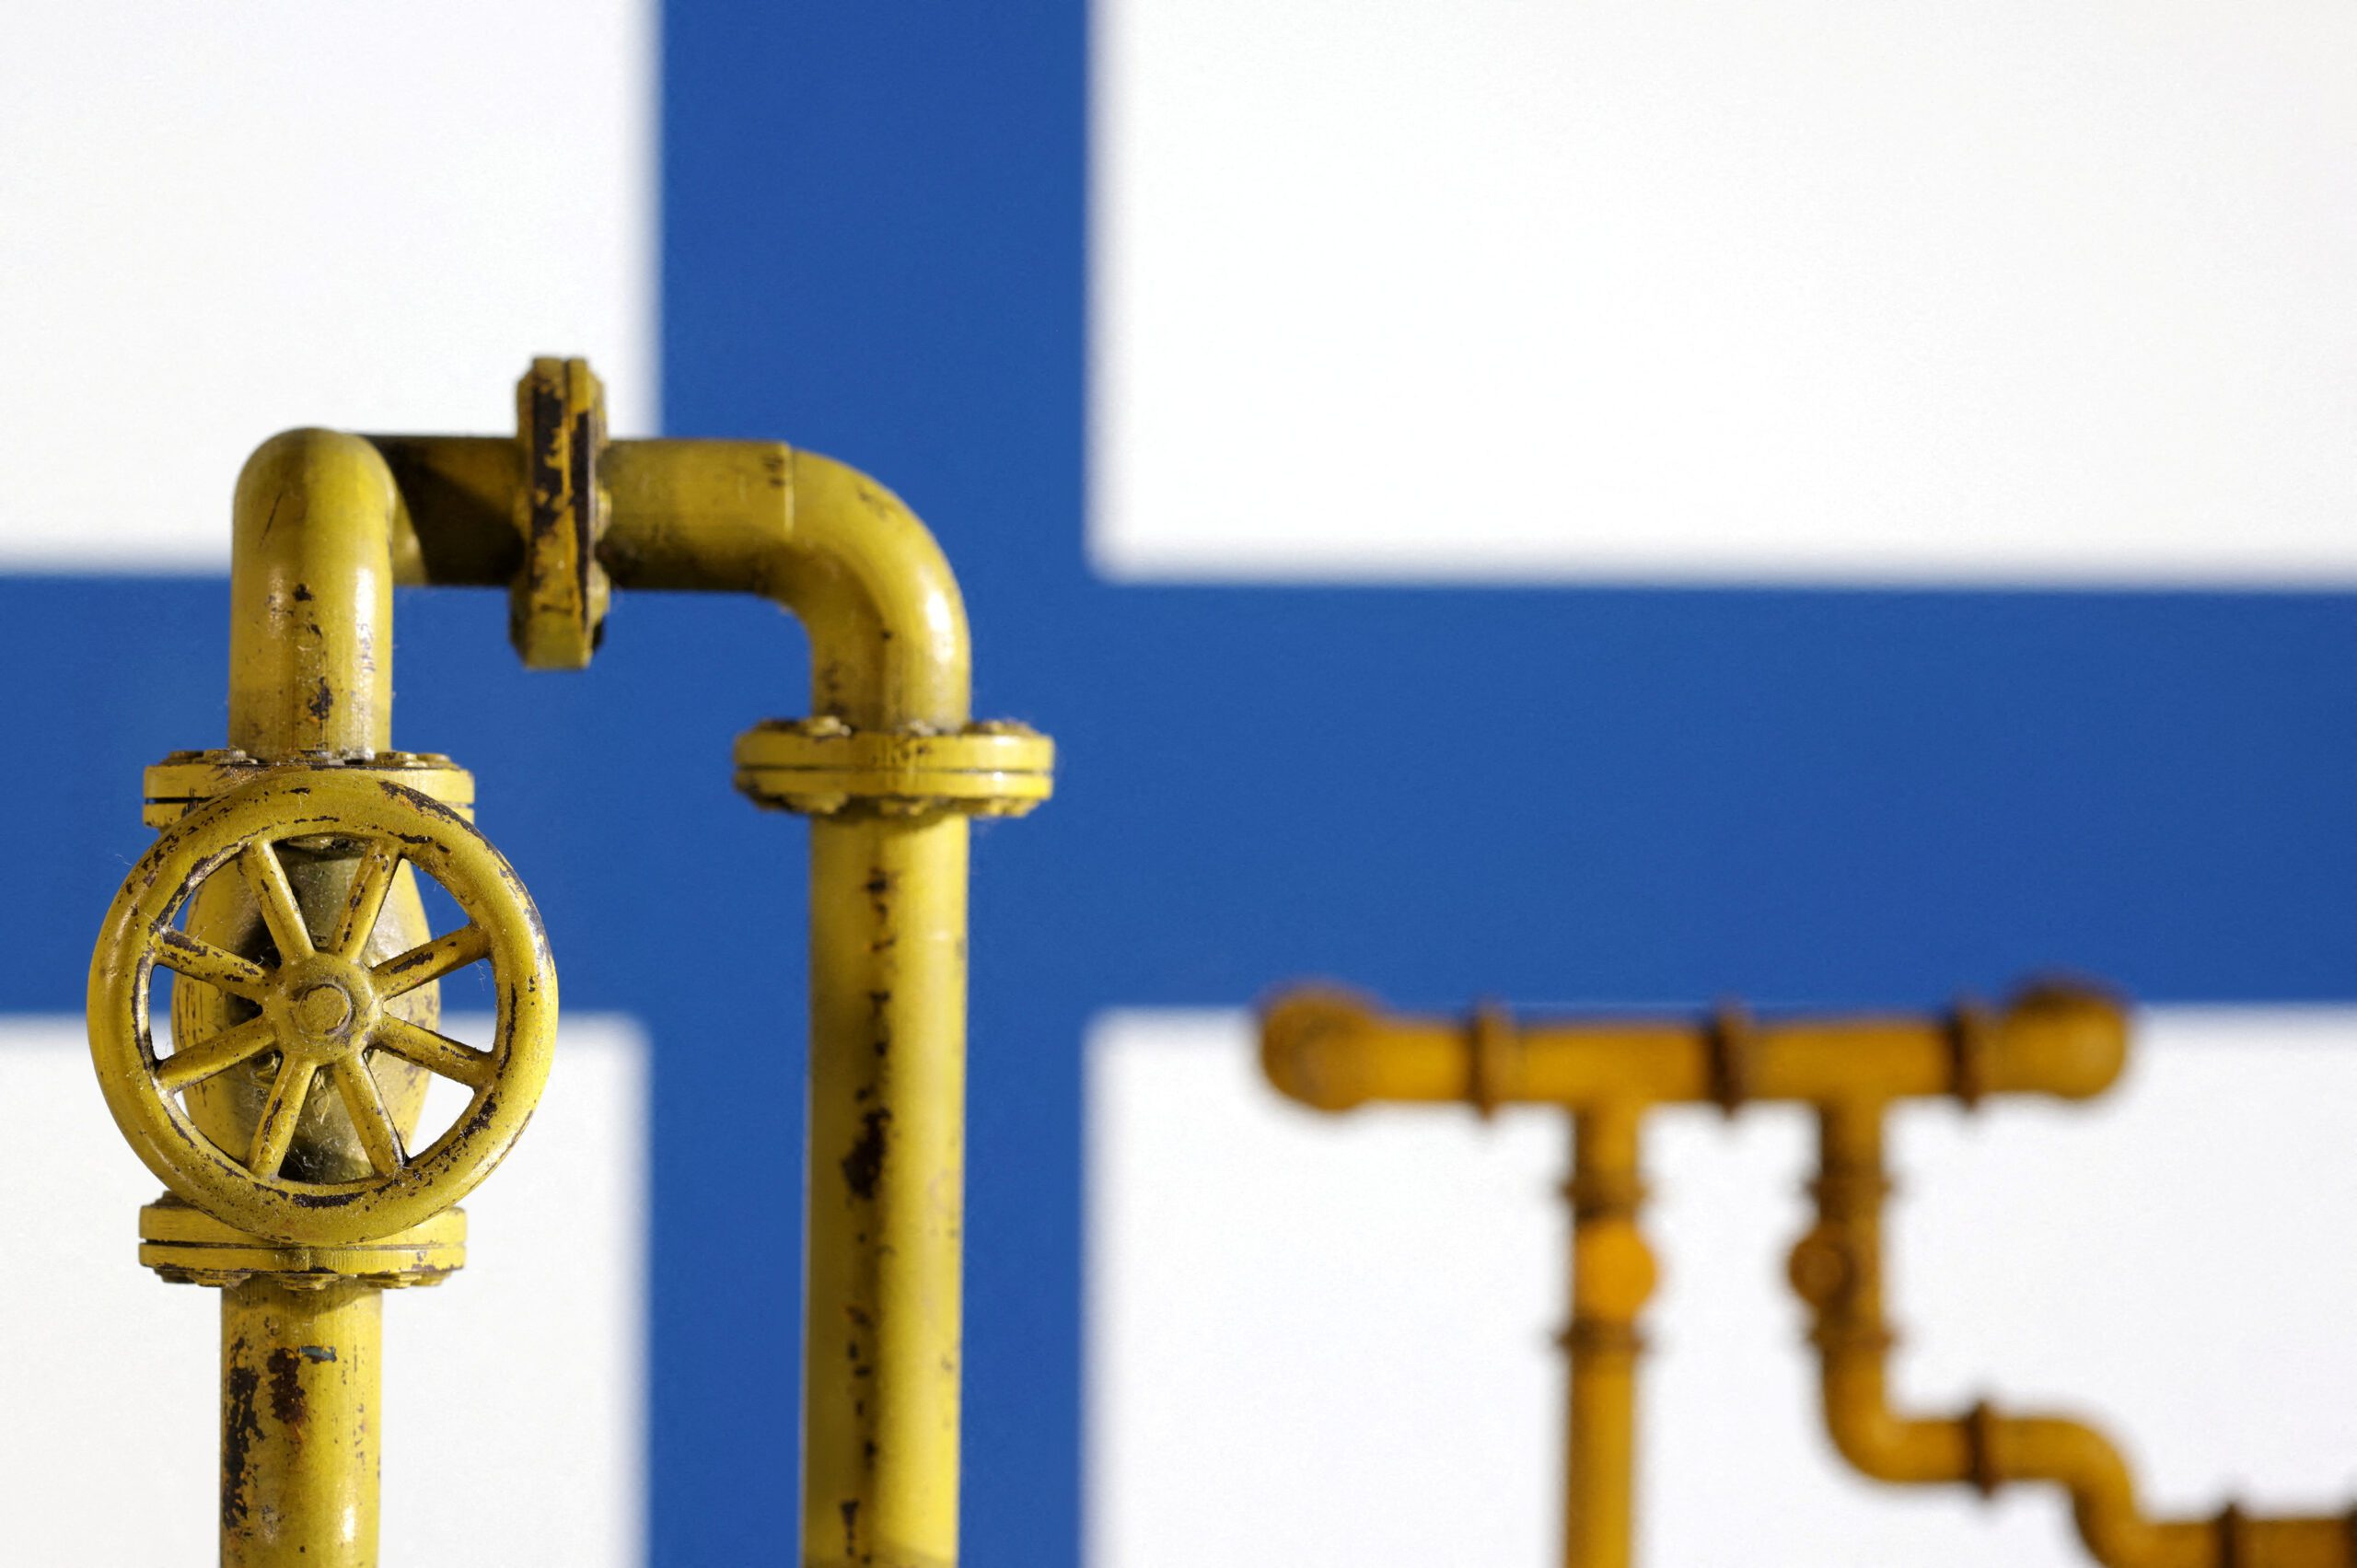 Illustration shows natural gas pipeline and Finland flag. REUTERS/Dado Ruvic/Illustration/File Photo